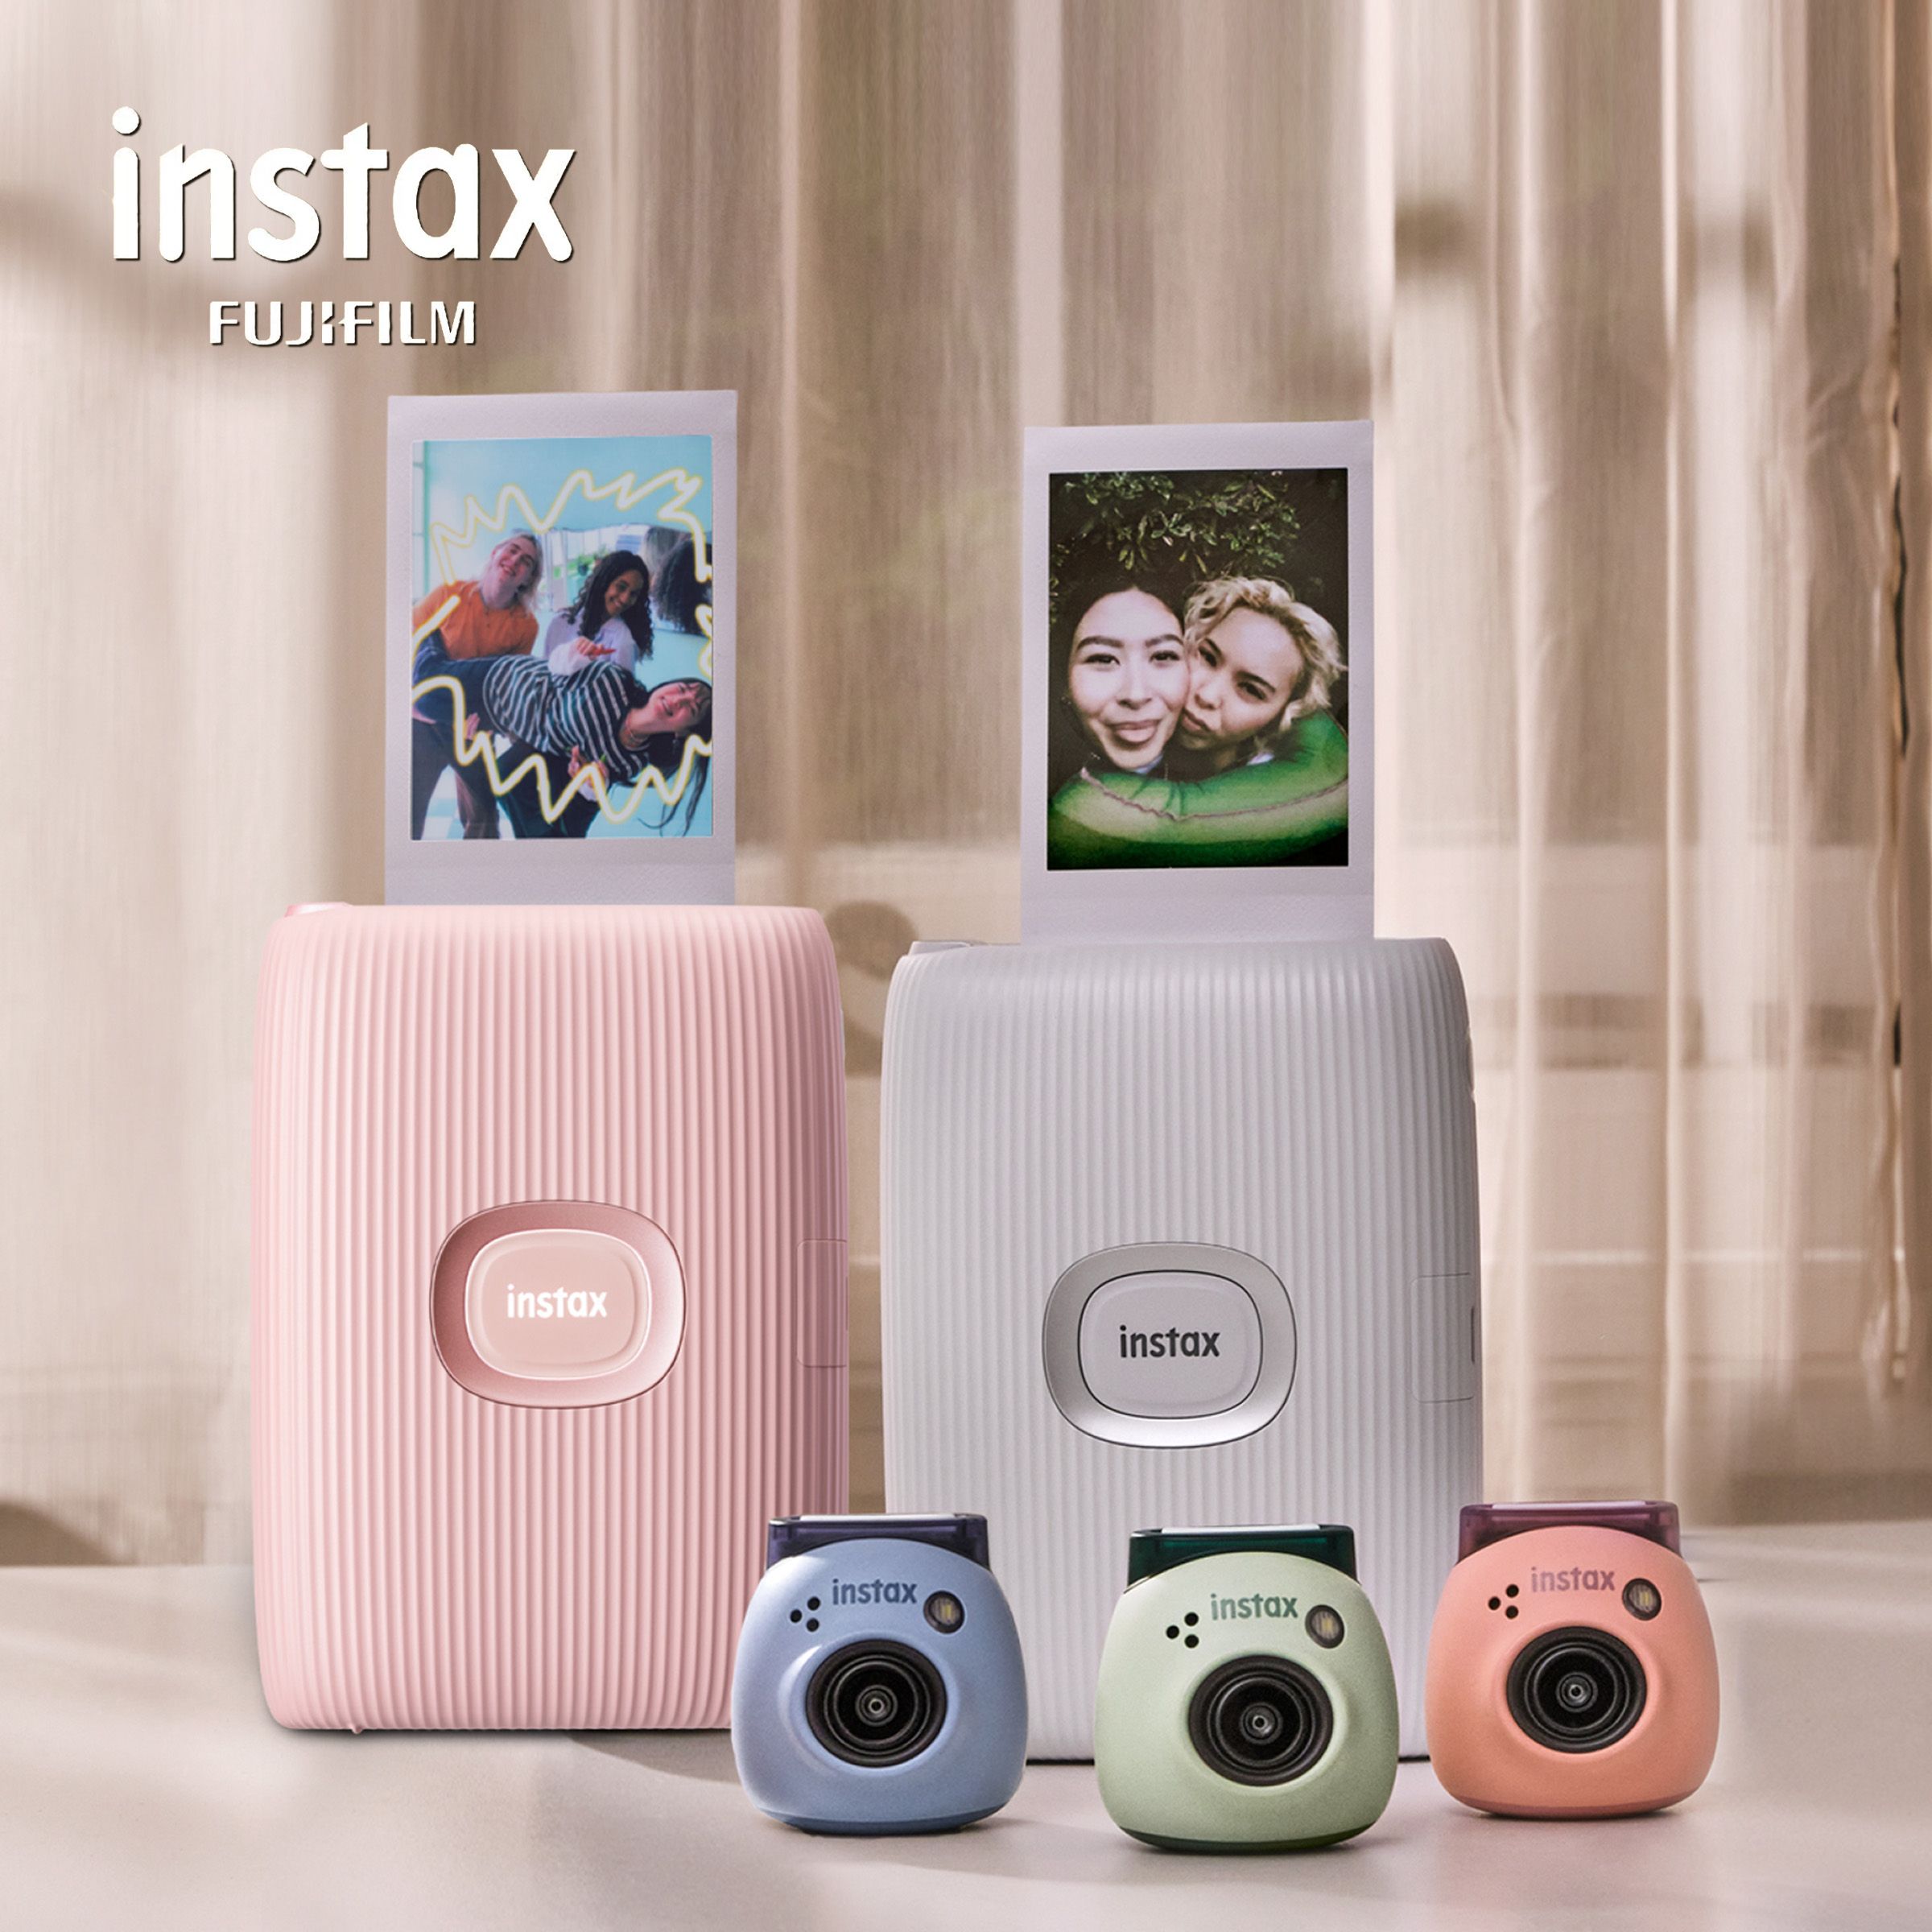 The one and only INSTAX Pal – a super small digital camera eager to capture small, spontaneous moments. Print directly from camera to an INSTAX mini Link 2 printer for a super, spine-tingling surprise